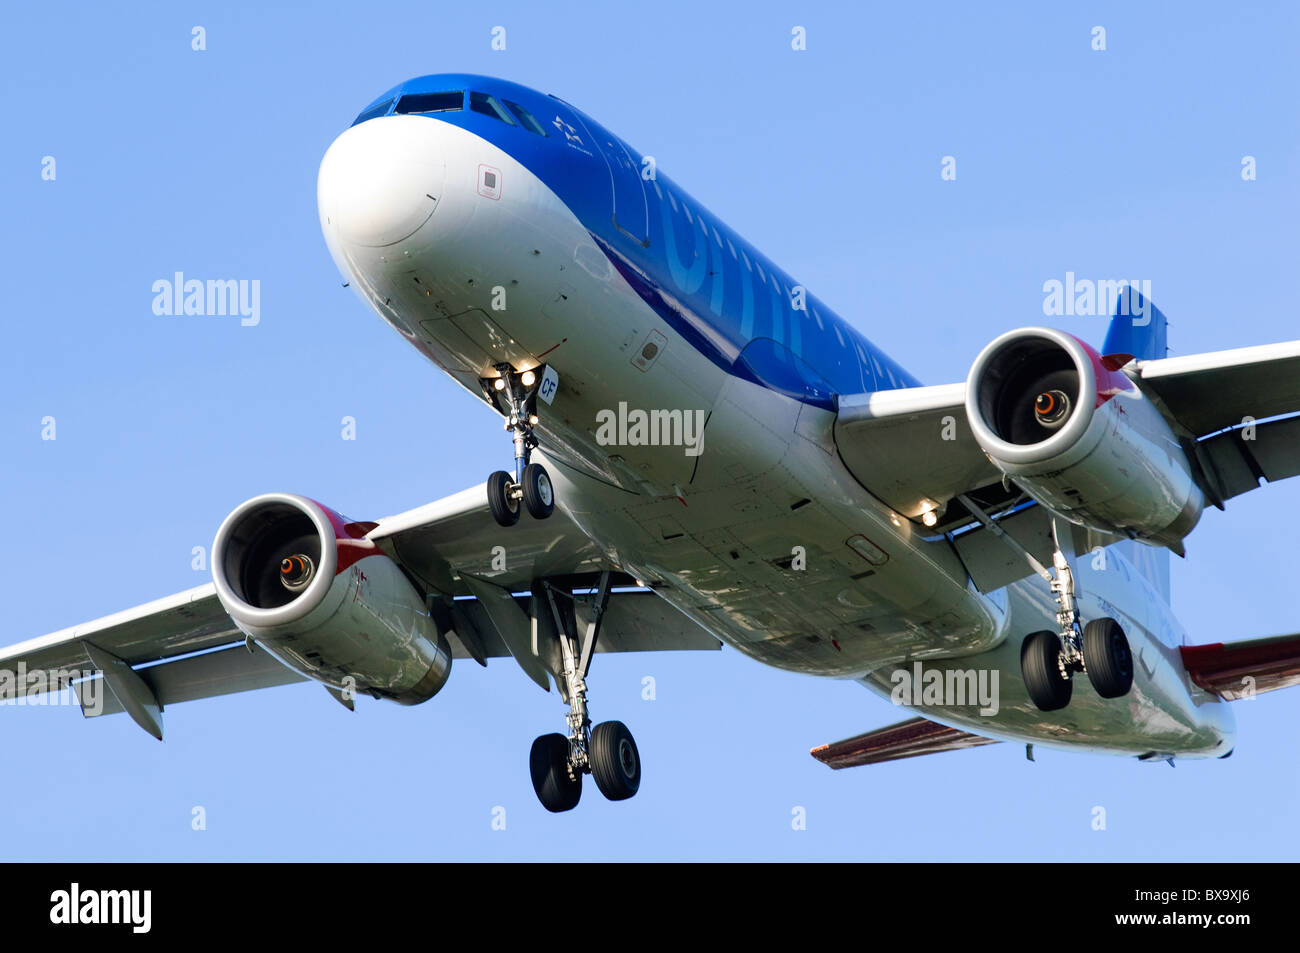 Airbus A319 operated by BMI on final approach for landing at London Heathrow Airport Stock Photo